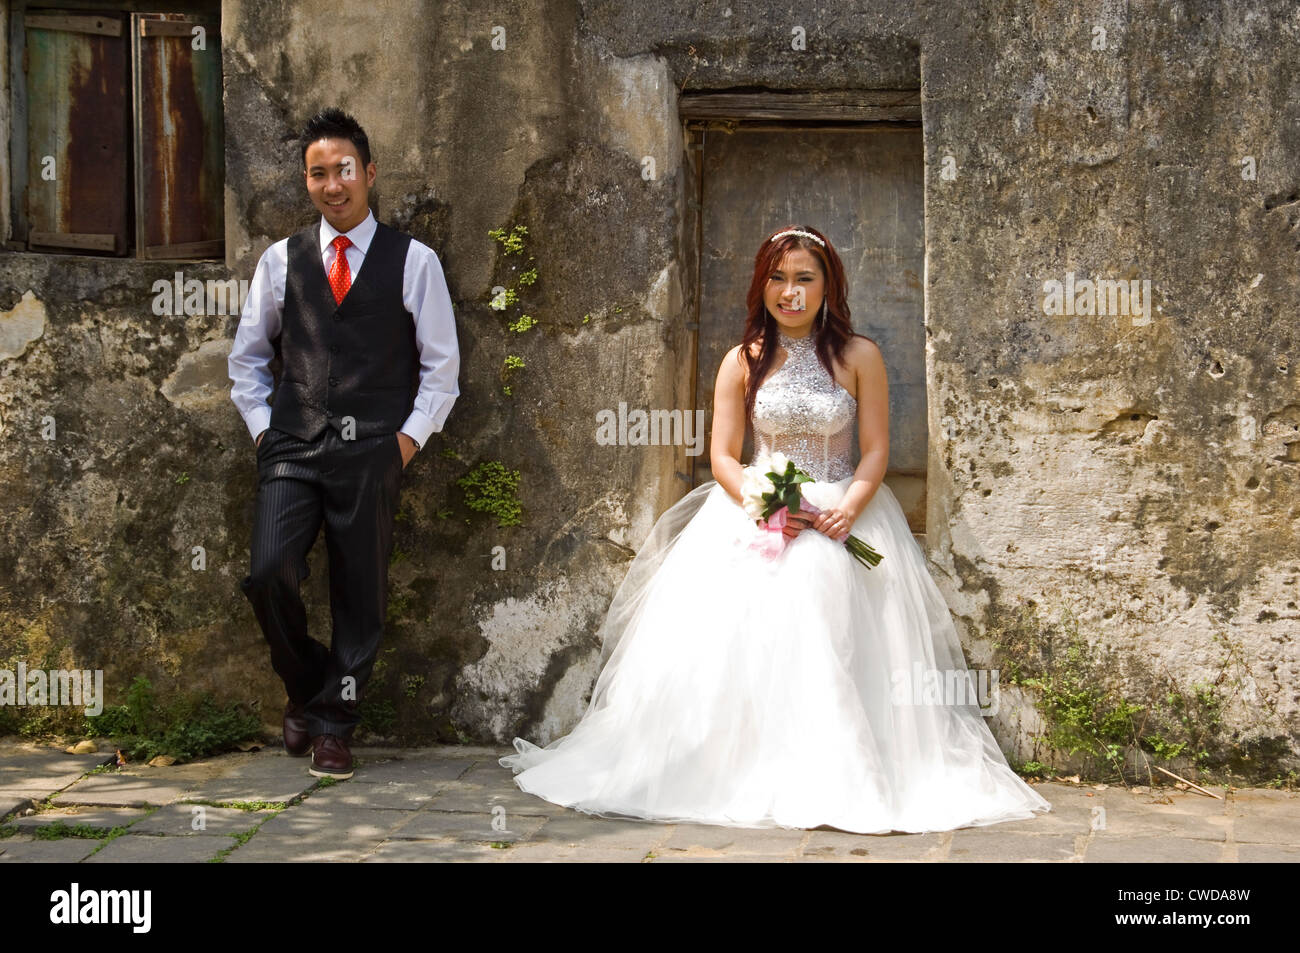 Horizontal portrait of a beautiful Vietnamese bride and handsome groom posing for photographs by a derelict building in Vietnam. Stock Photo